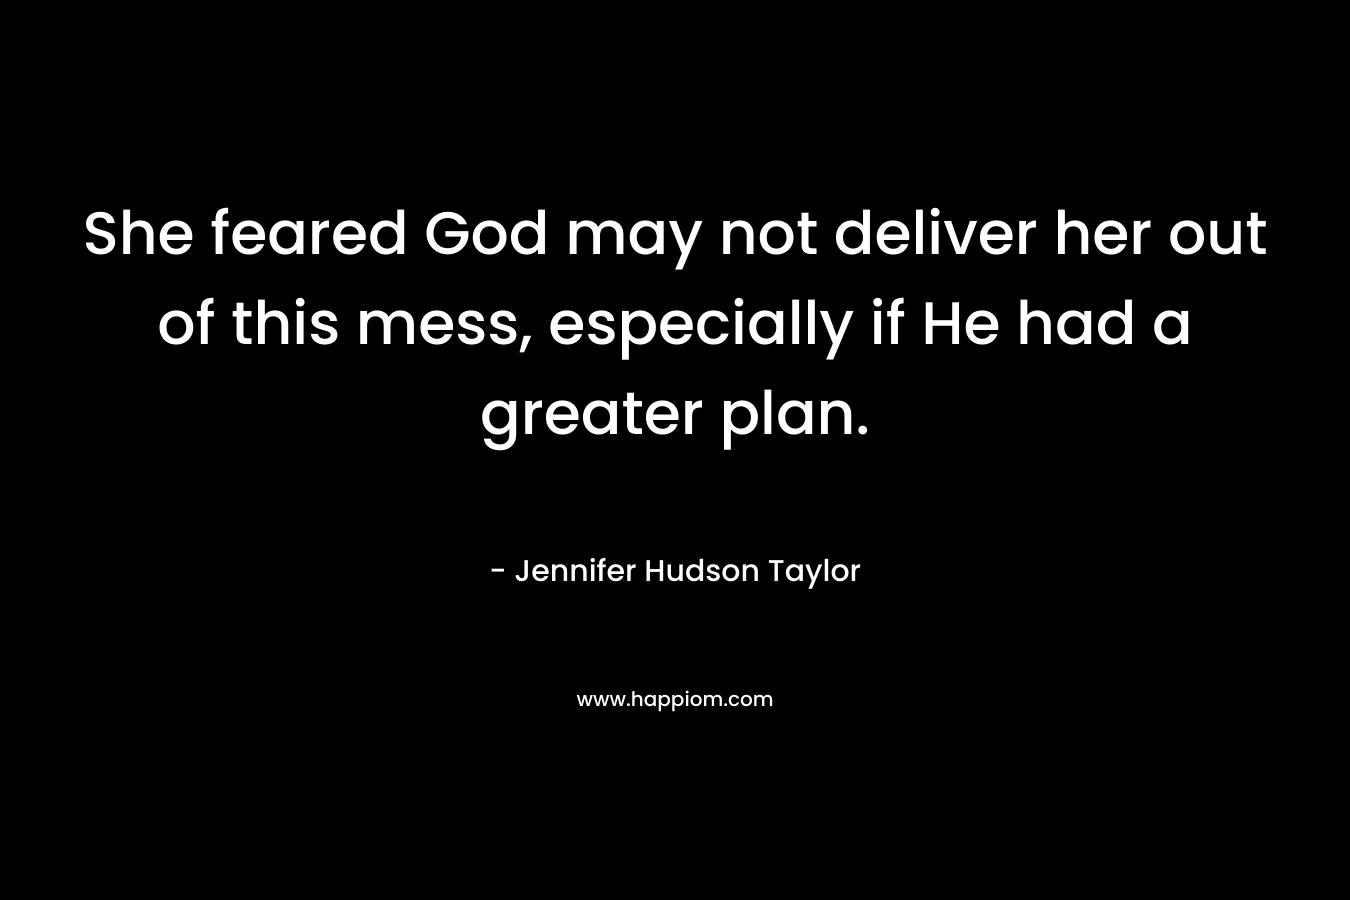 She feared God may not deliver her out of this mess, especially if He had a greater plan.